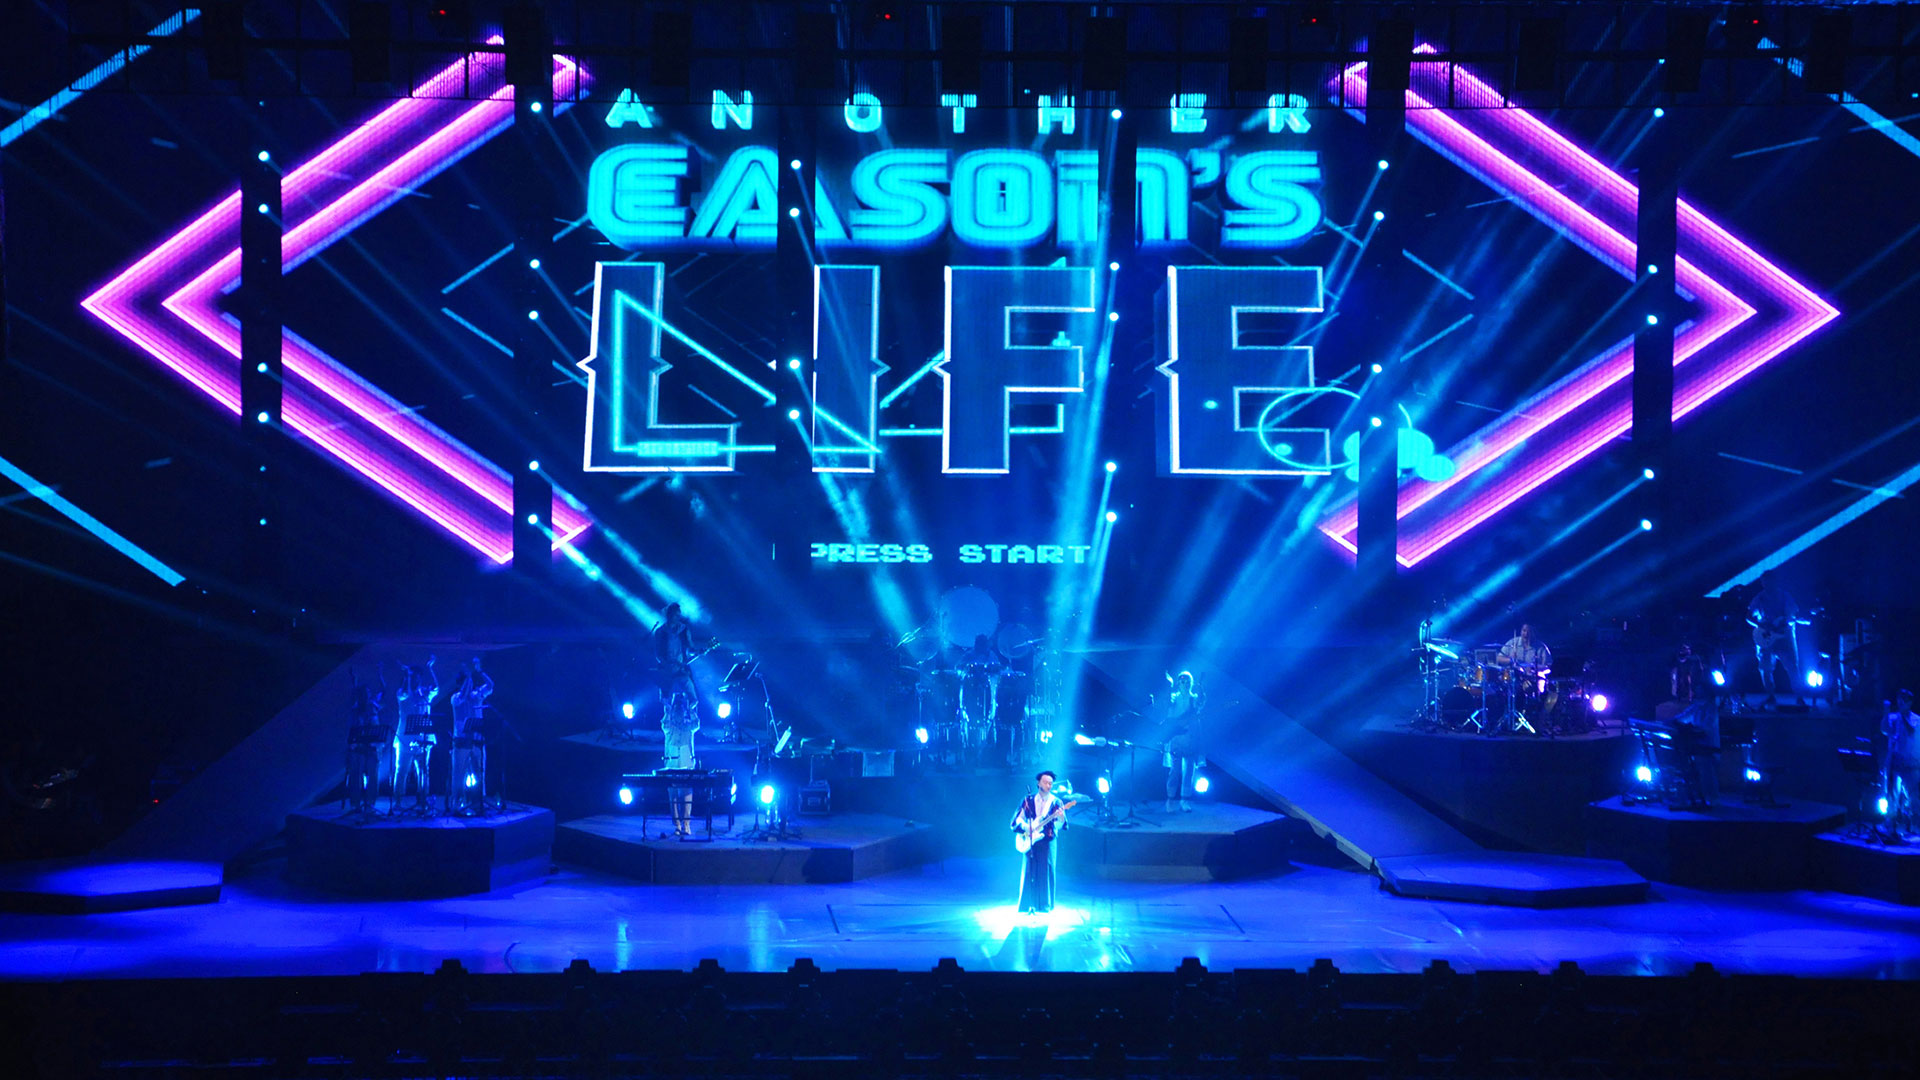 Eason's Life in Macao